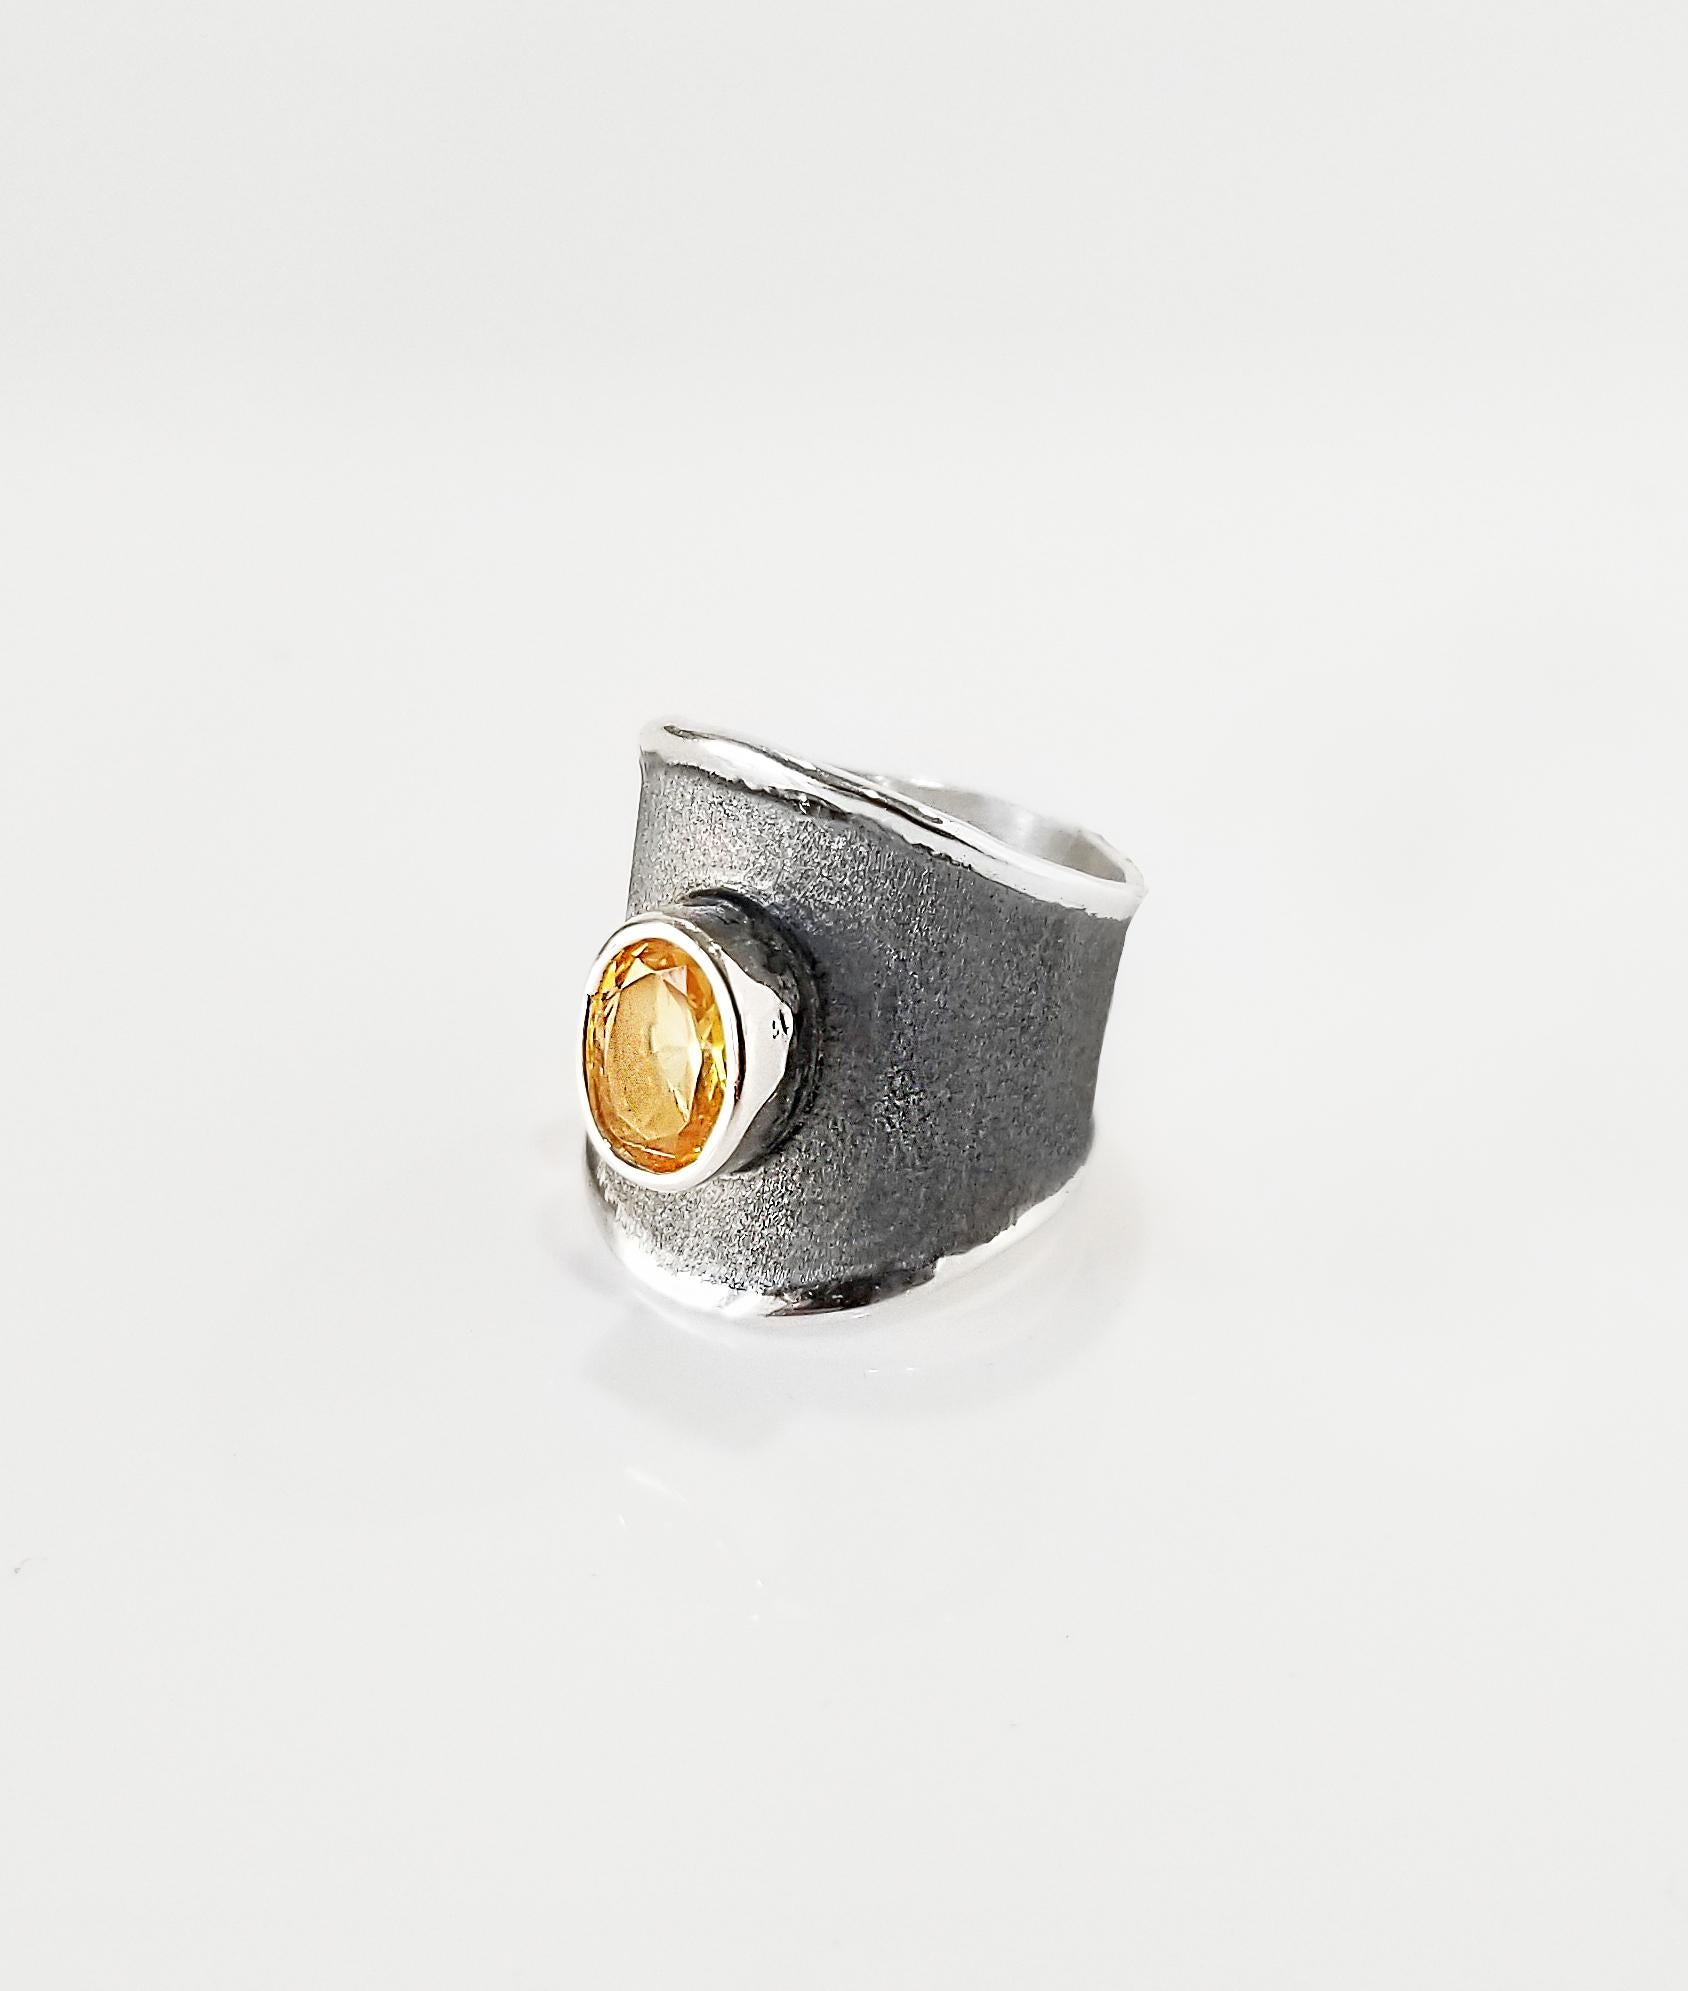 Yianni Creations Hephestos Collection 100% Handmade Artisan Ring from Fine Silver. The ring features 1.35 Carat Oval Cut Citrine and unique oxidized Black Rhodium background, both complemented by unique techniques of craftsmanship - brushed texture